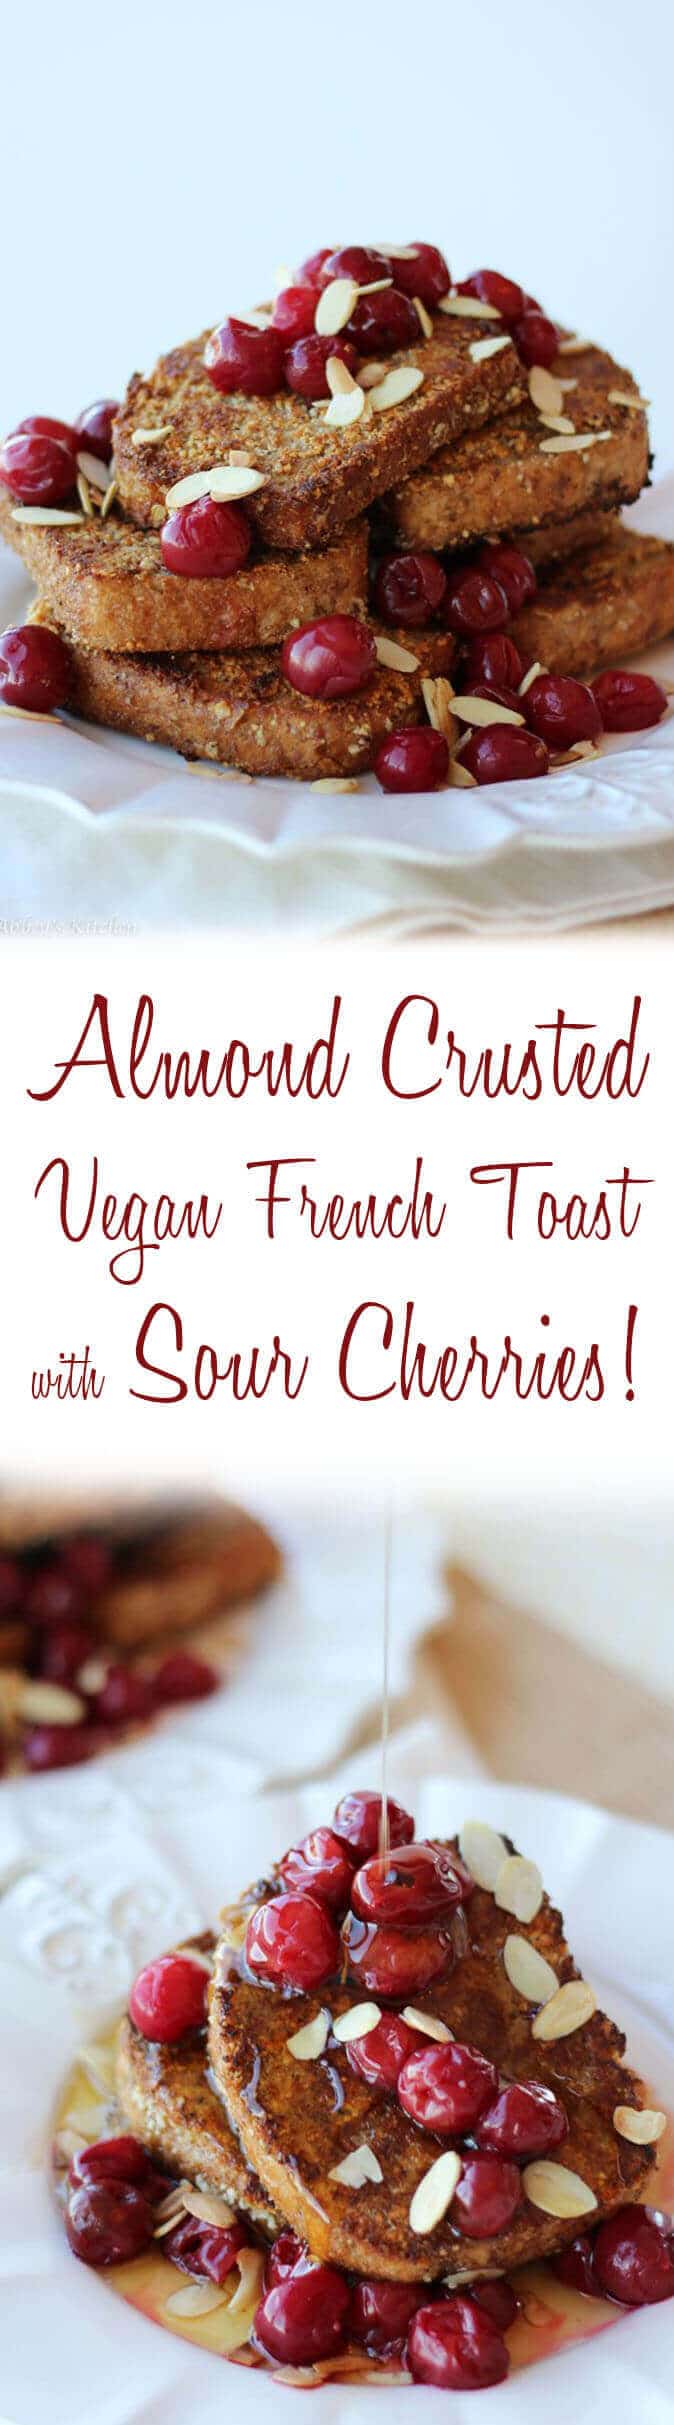 Almond Sour Cherry Healthy & Vegan Toast Crust Sauce French with